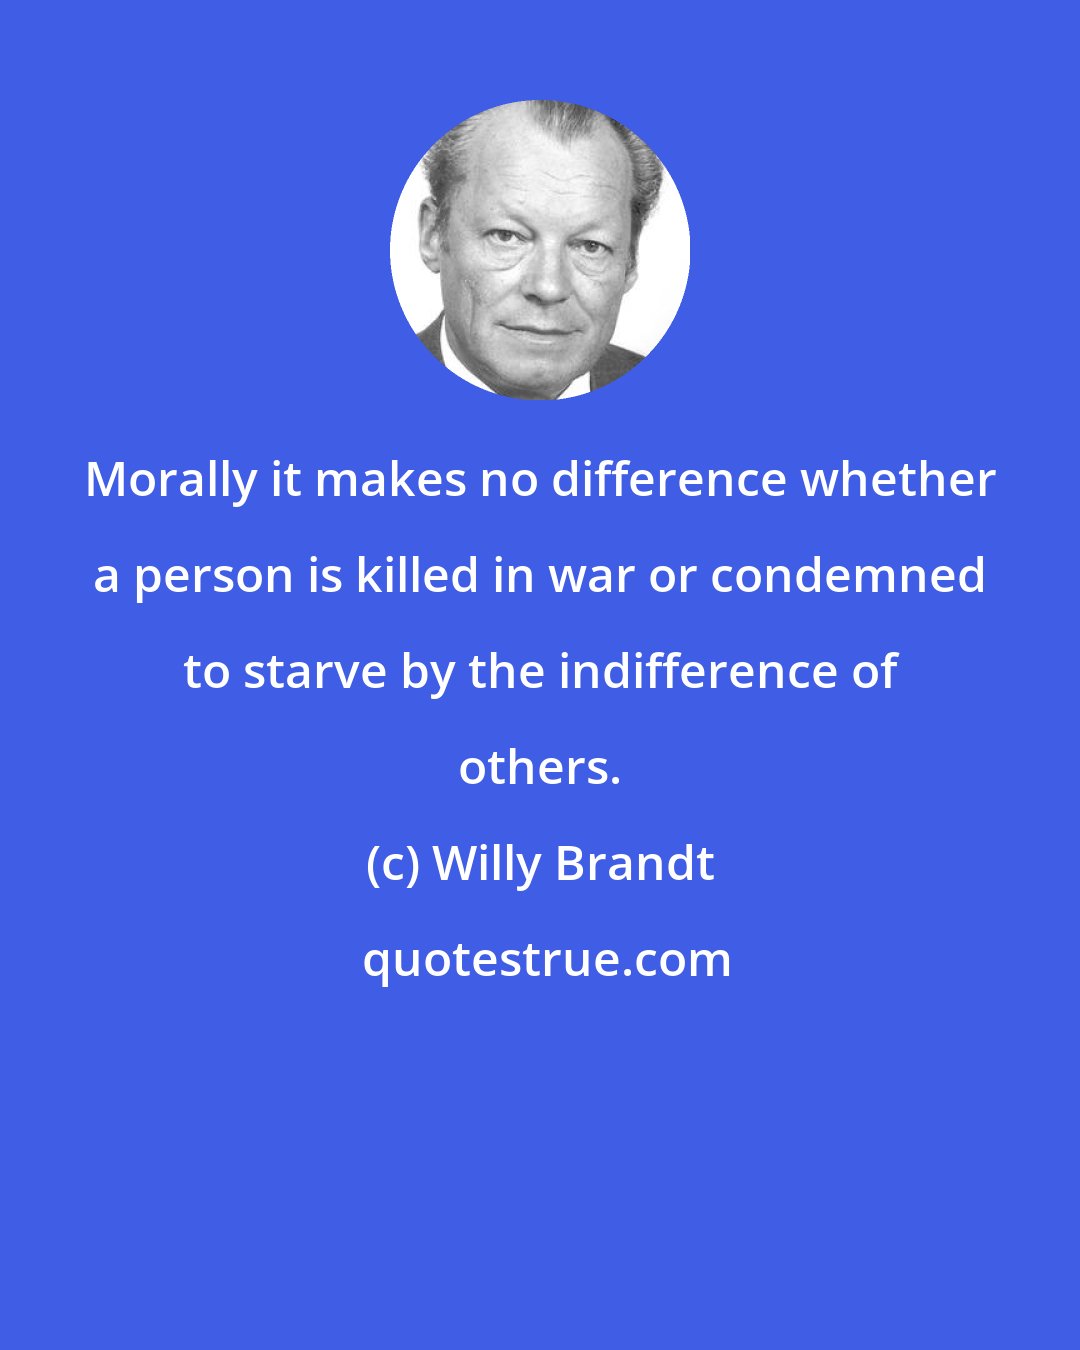 Willy Brandt: Morally it makes no difference whether a person is killed in war or condemned to starve by the indifference of others.